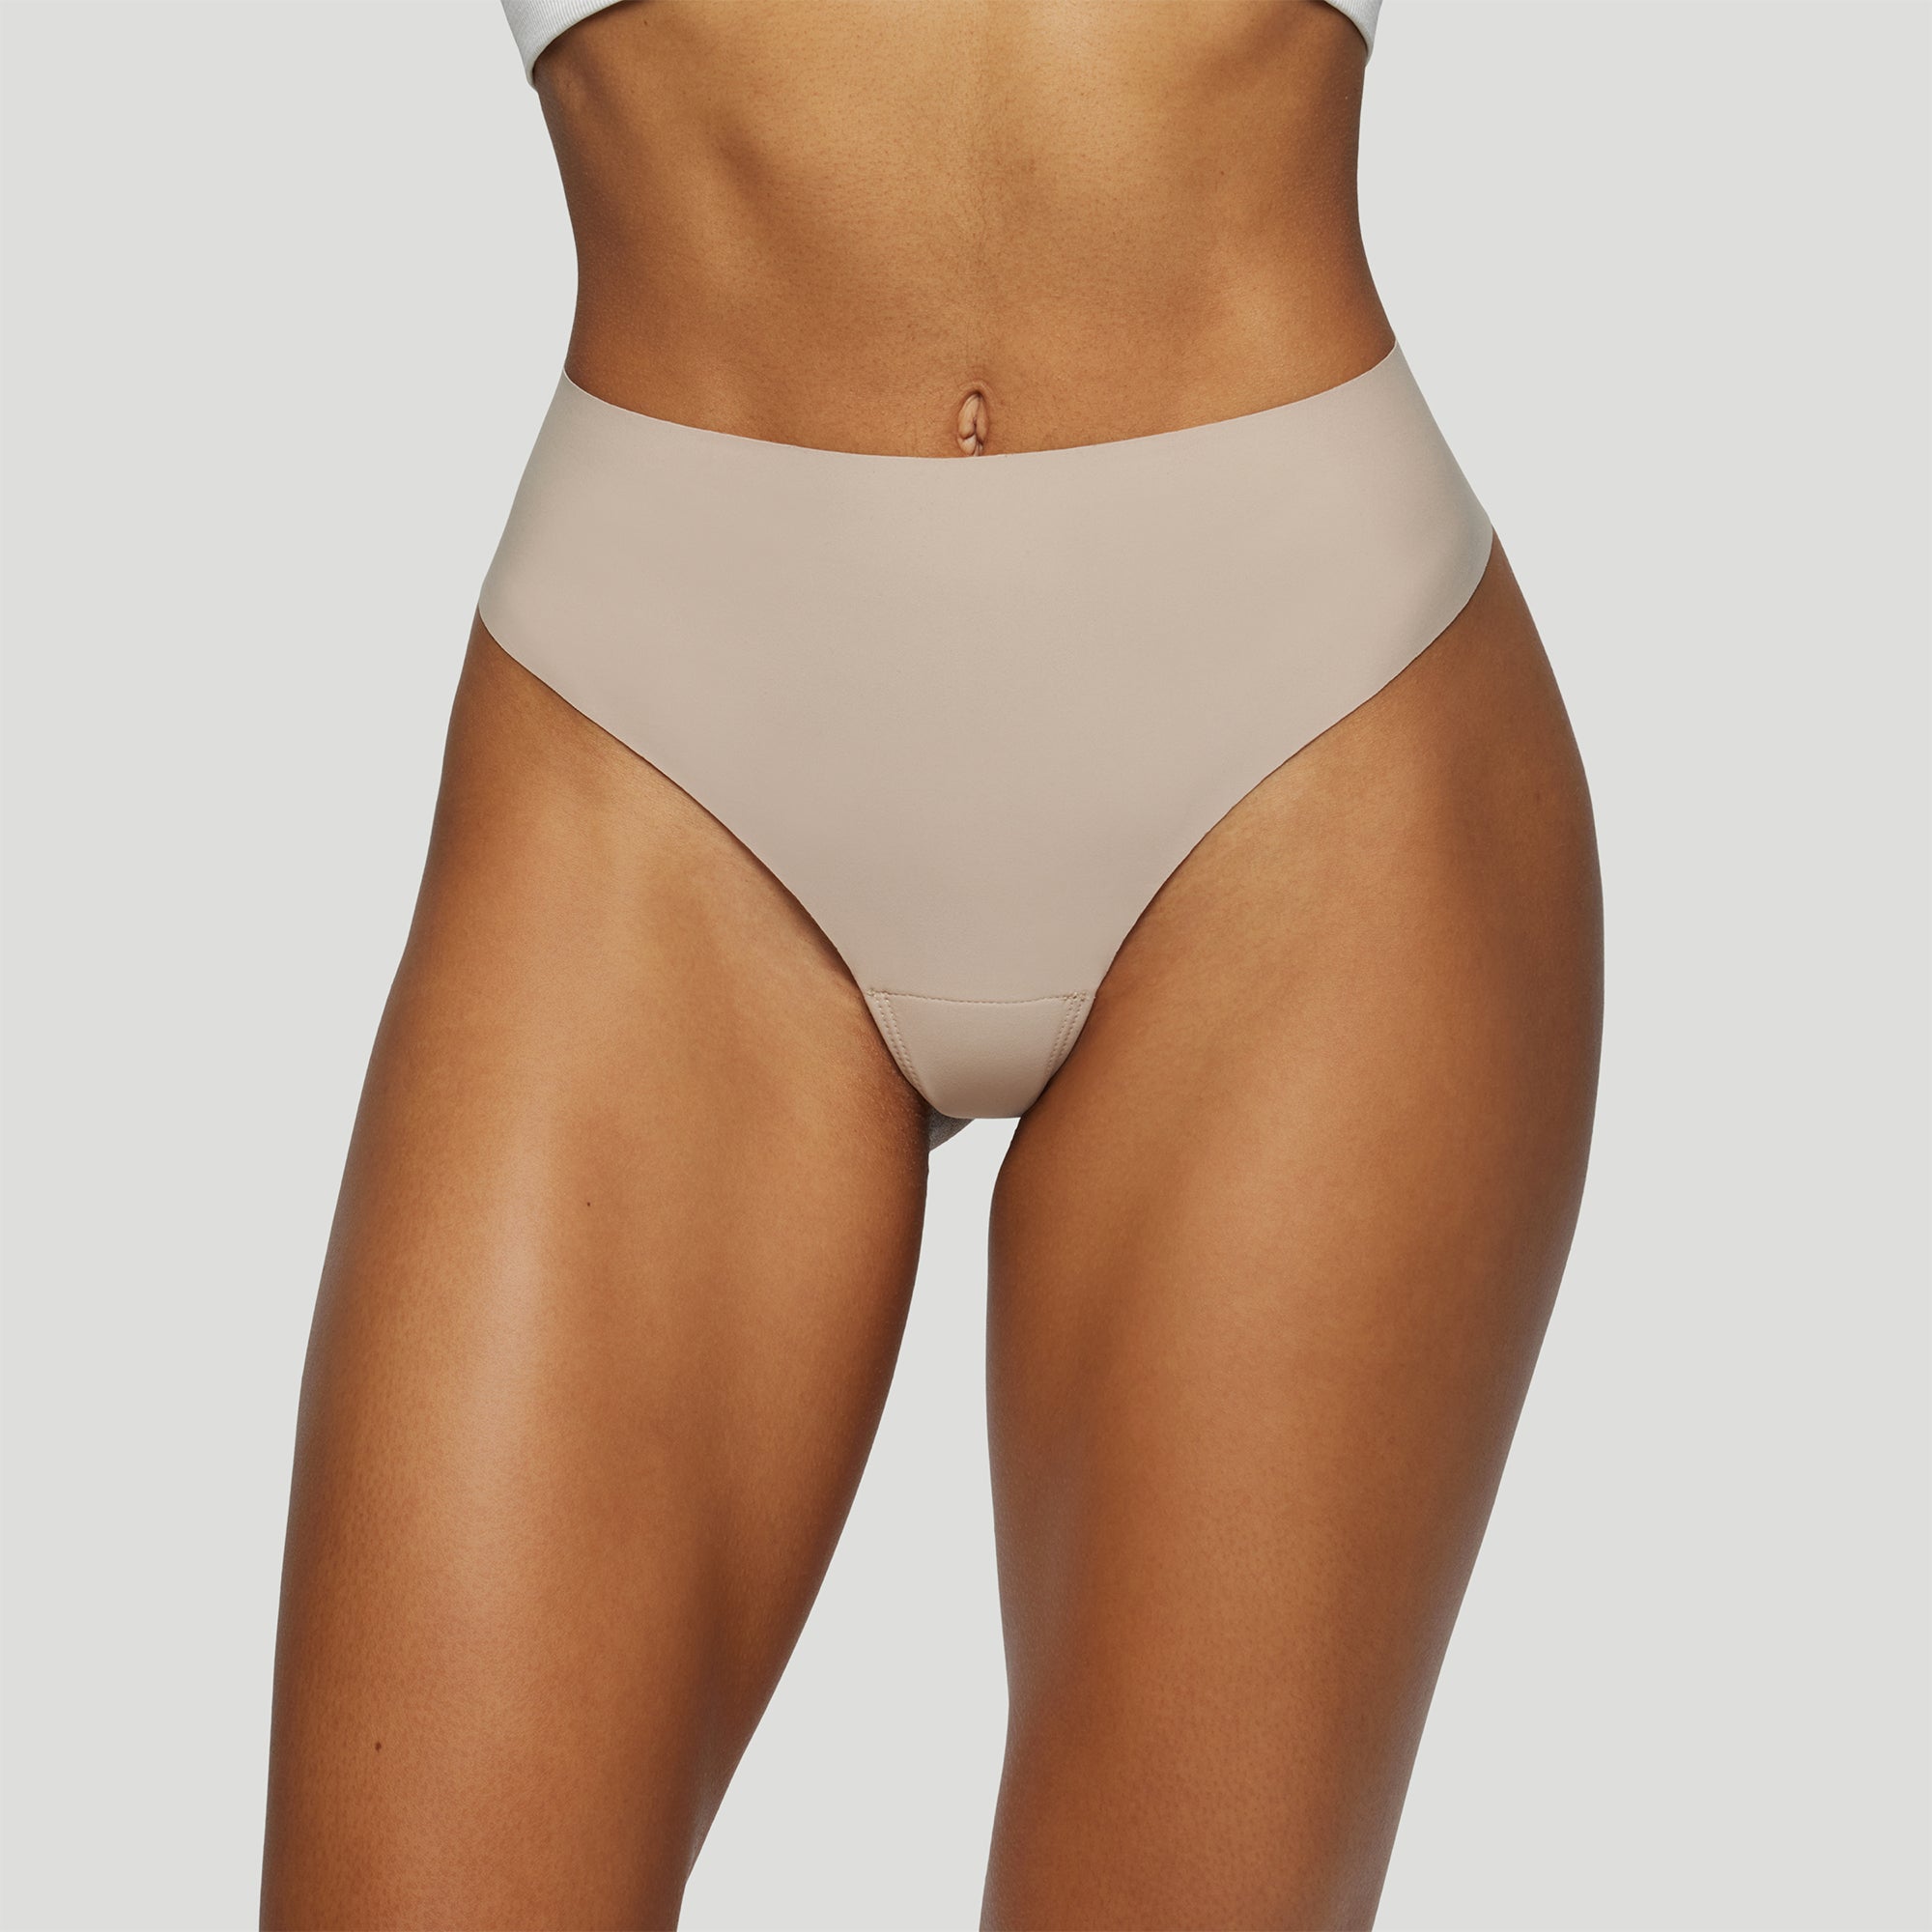 Camel toe panties for sale: This is a thing now